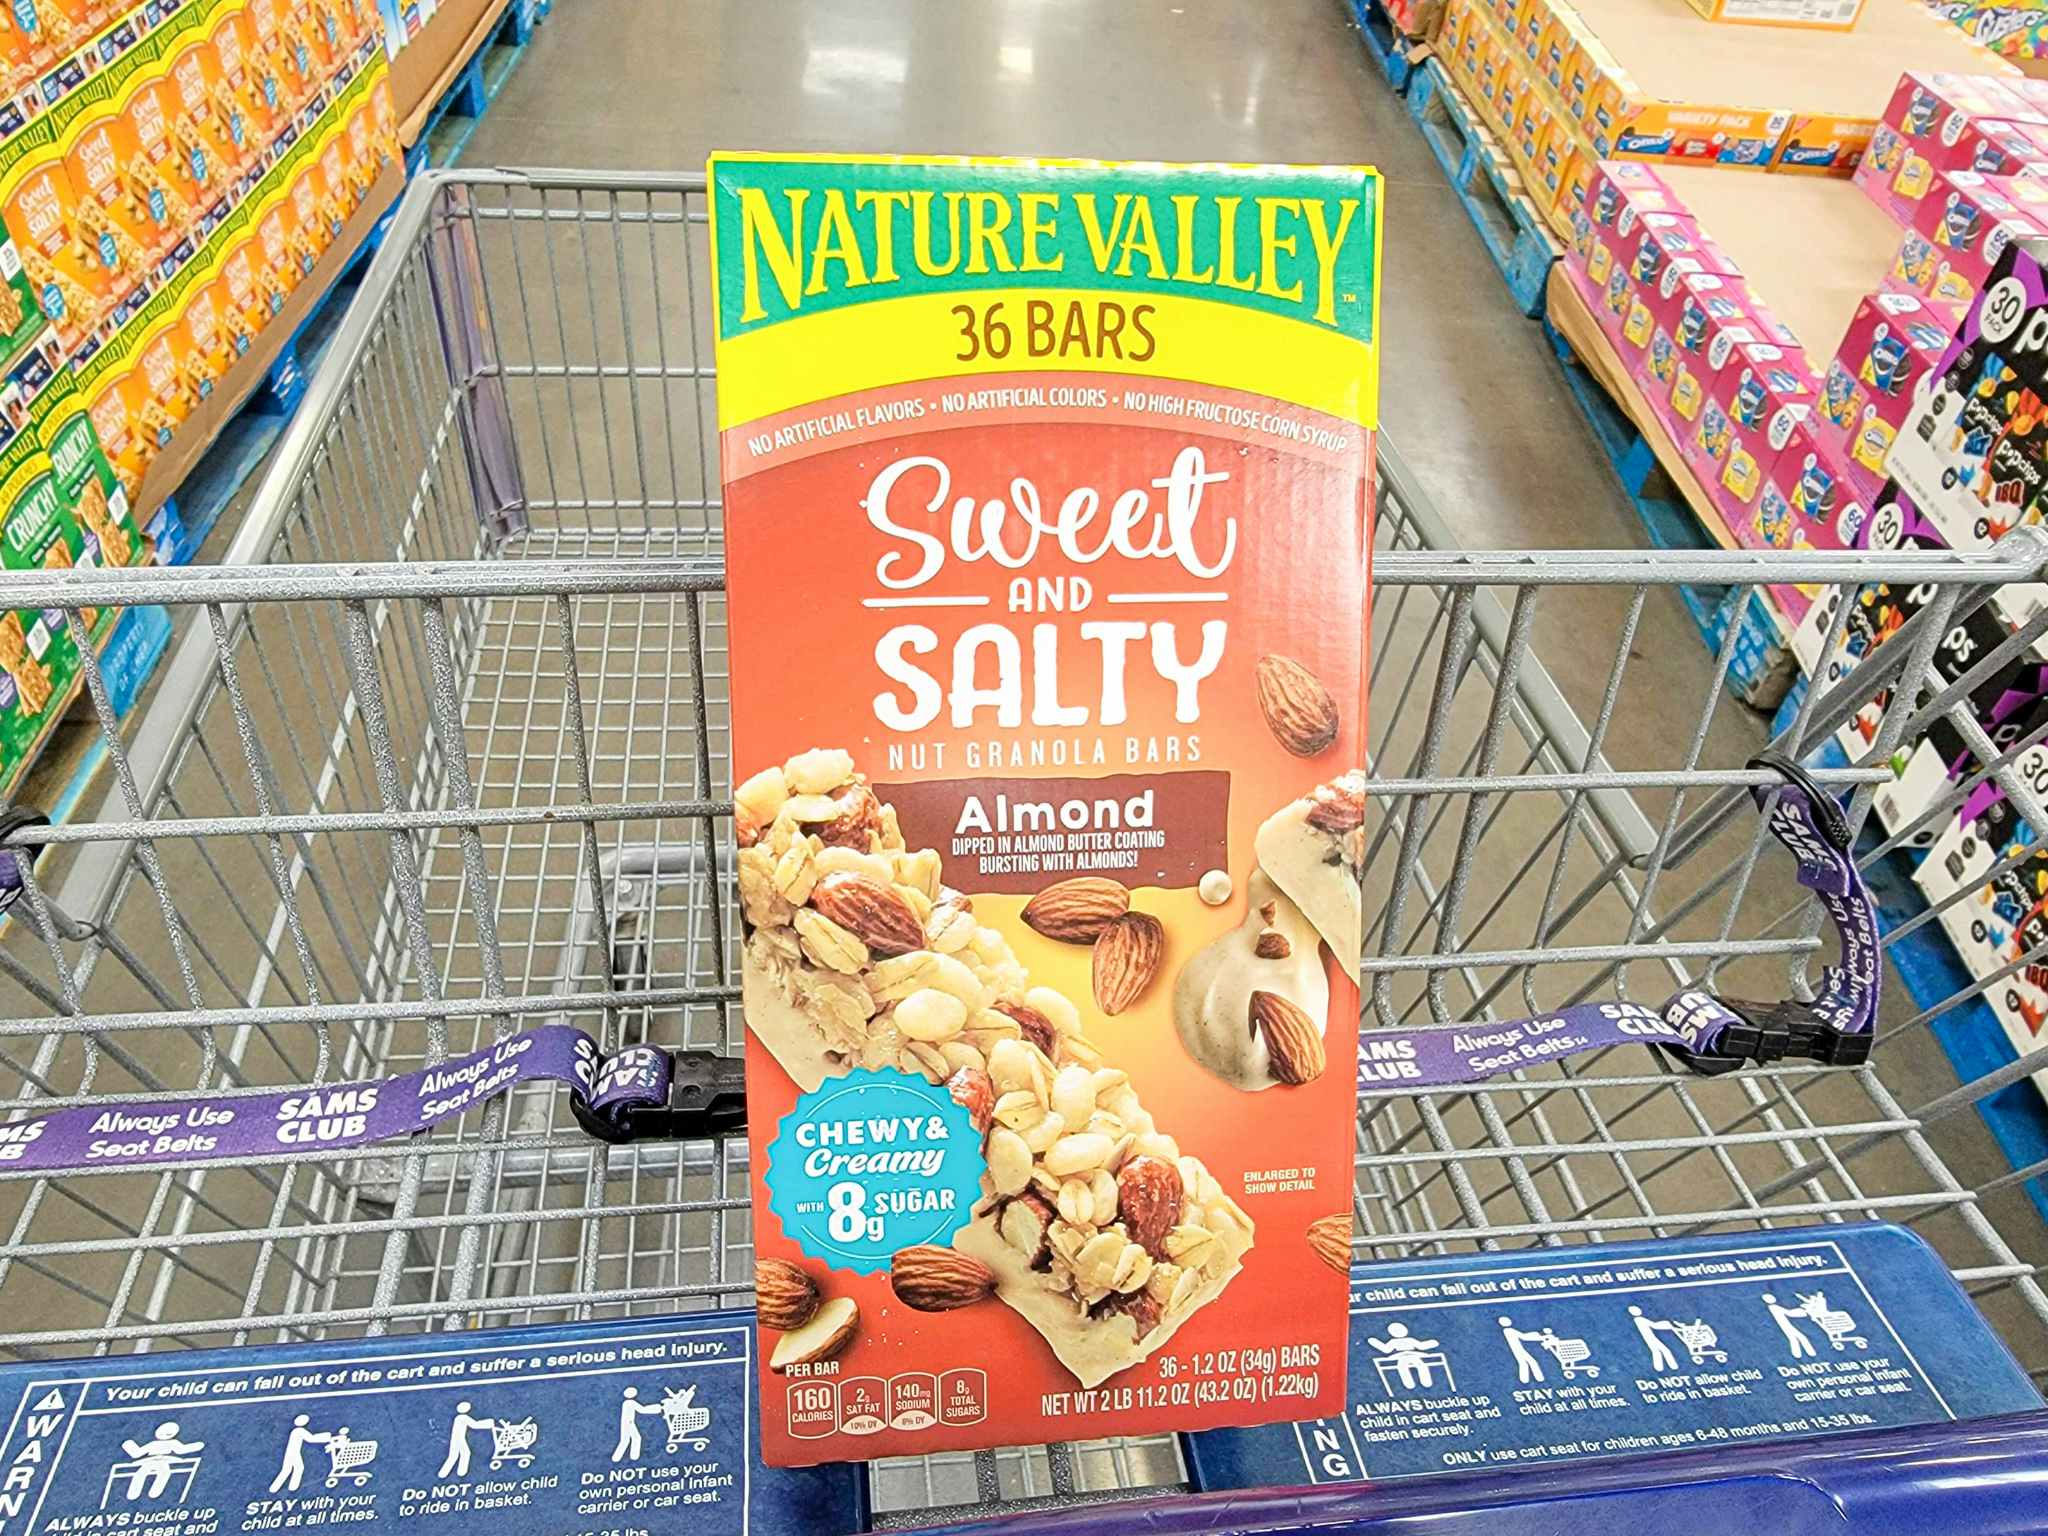 a box of nature valley sweet & salty almond bars